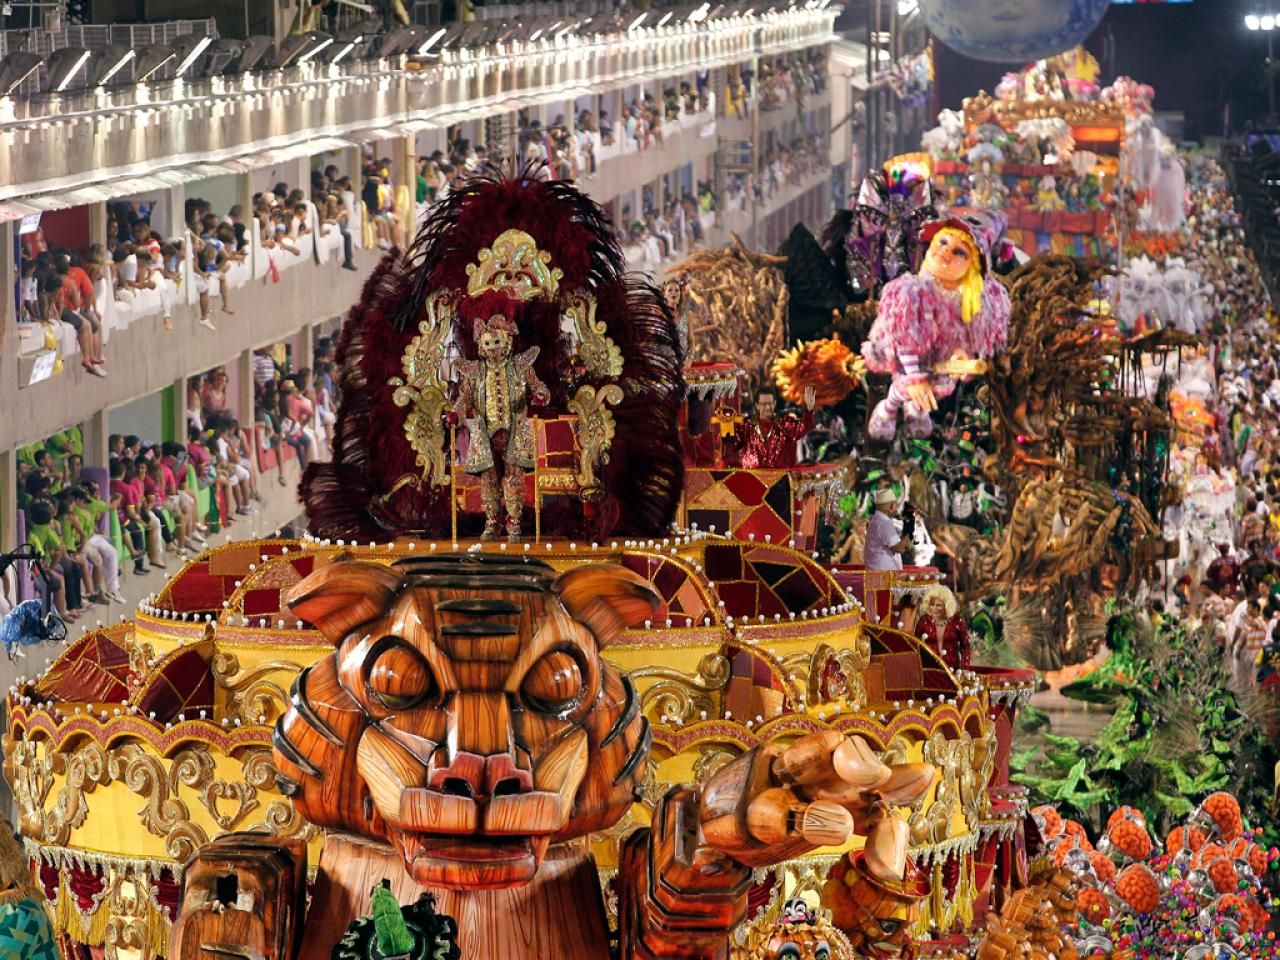 Breezy Explainer: Rio Carnival 2023 begins: All about the world's biggest party